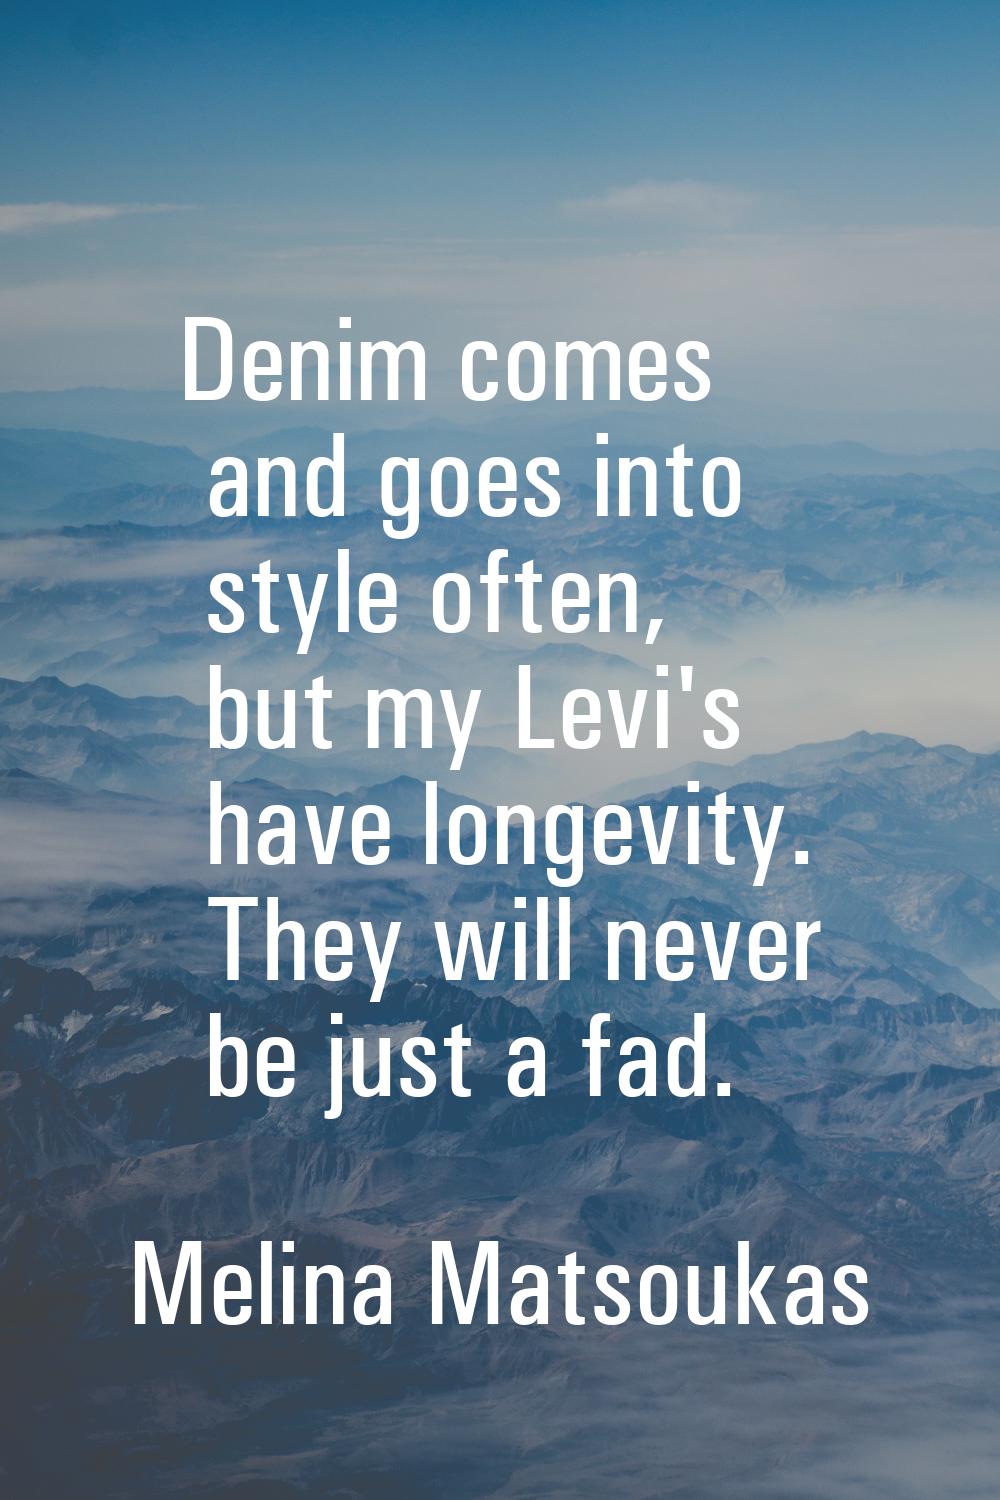 Denim comes and goes into style often, but my Levi's have longevity. They will never be just a fad.